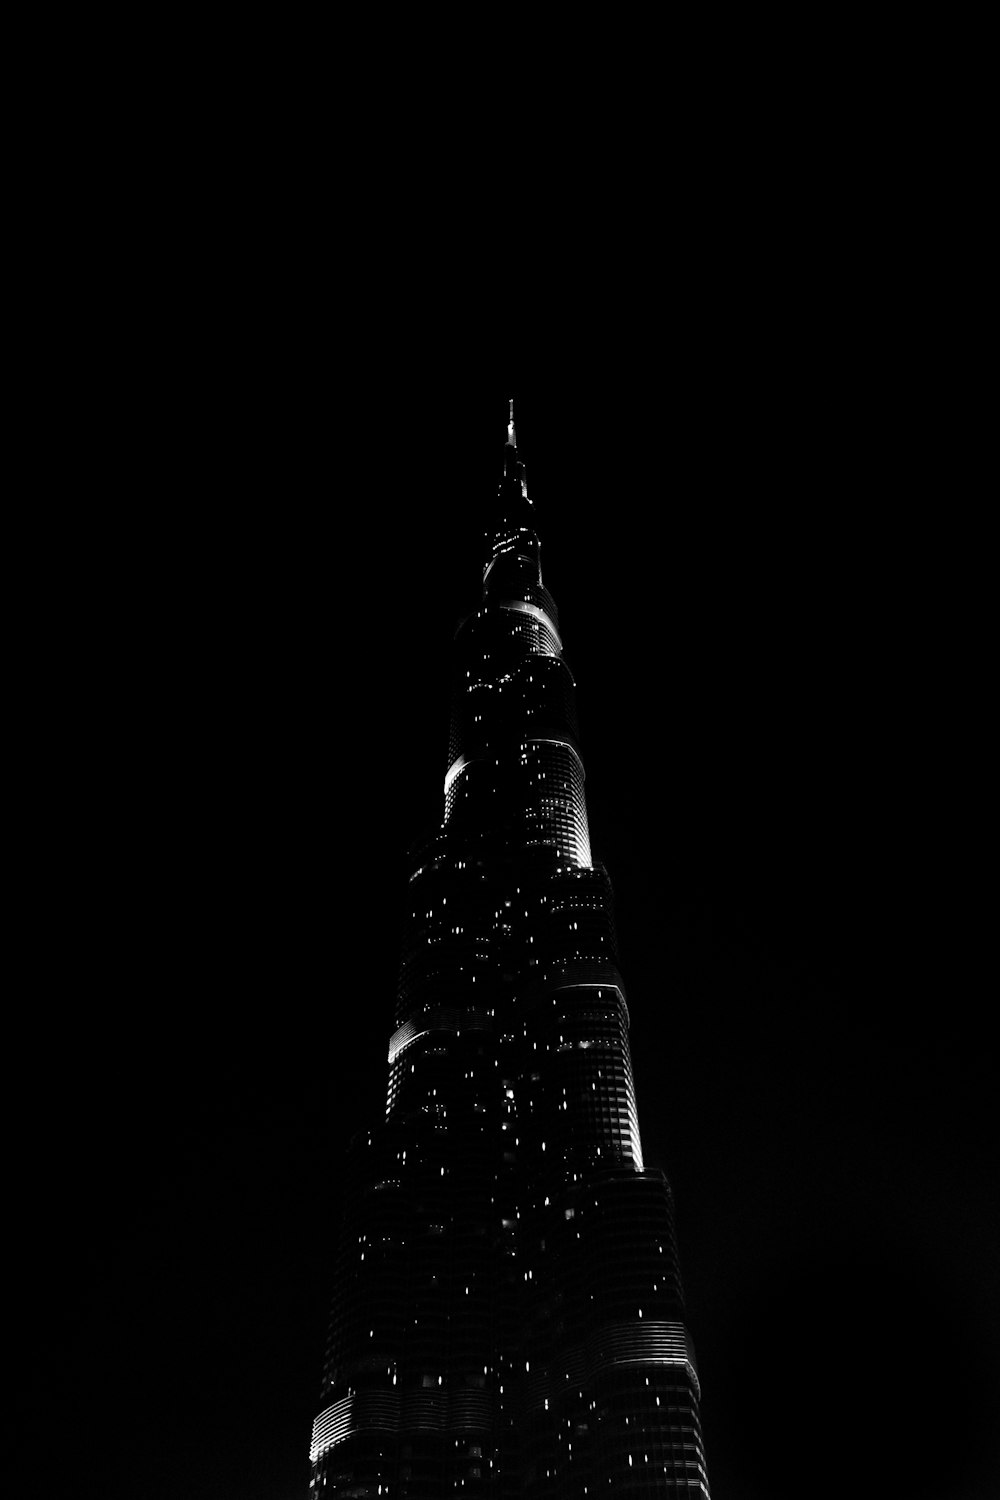 a very tall building lit up at night